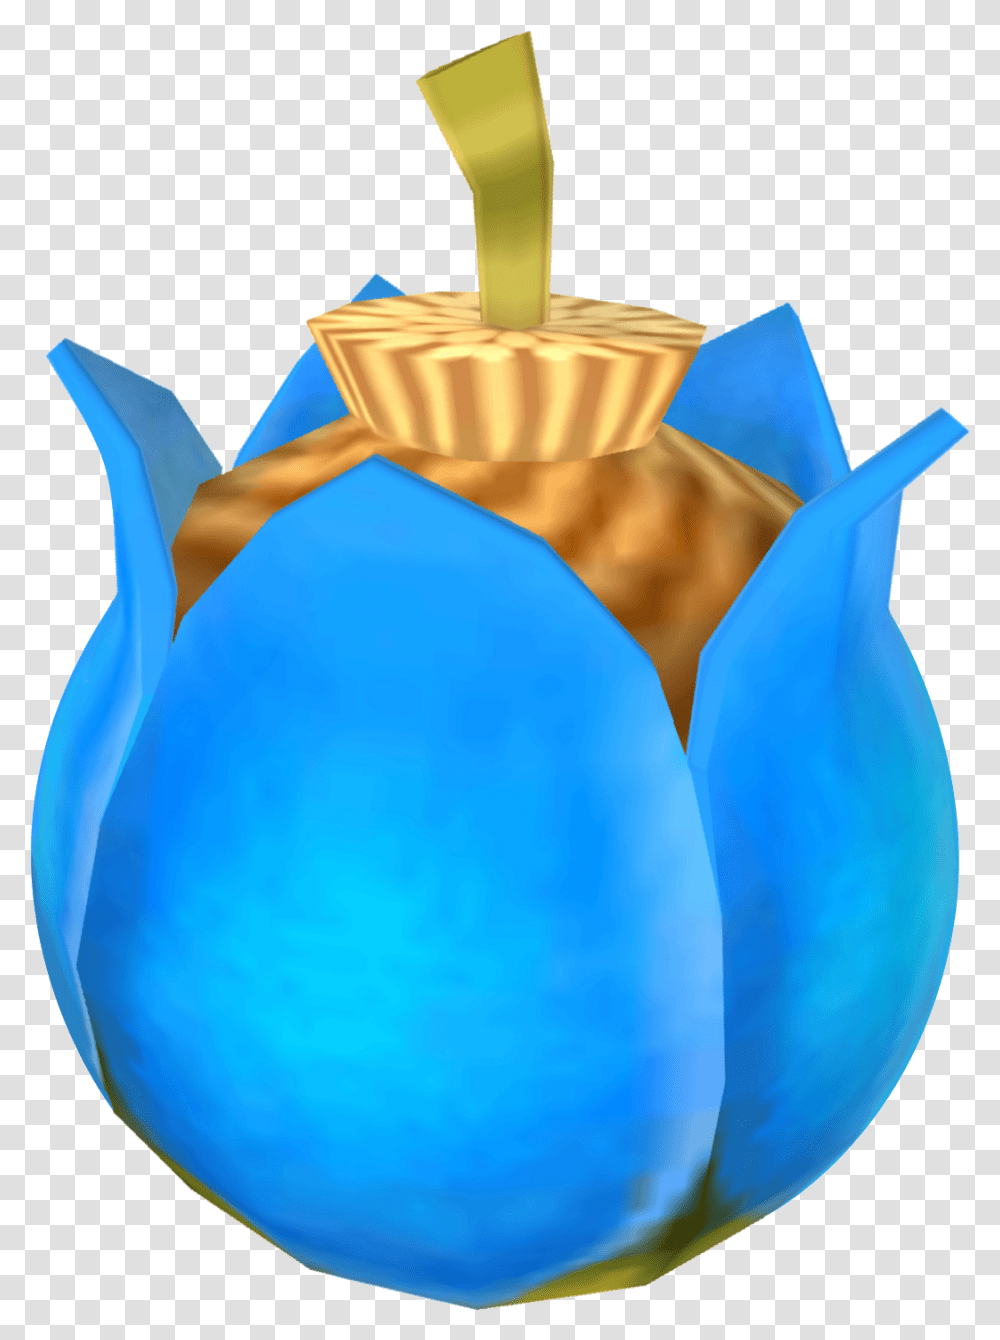 Download Zelda Items Clipart Library Bomb Flower Skyward Sword, Balloon, Candle, Outdoors, Lighting Transparent Png